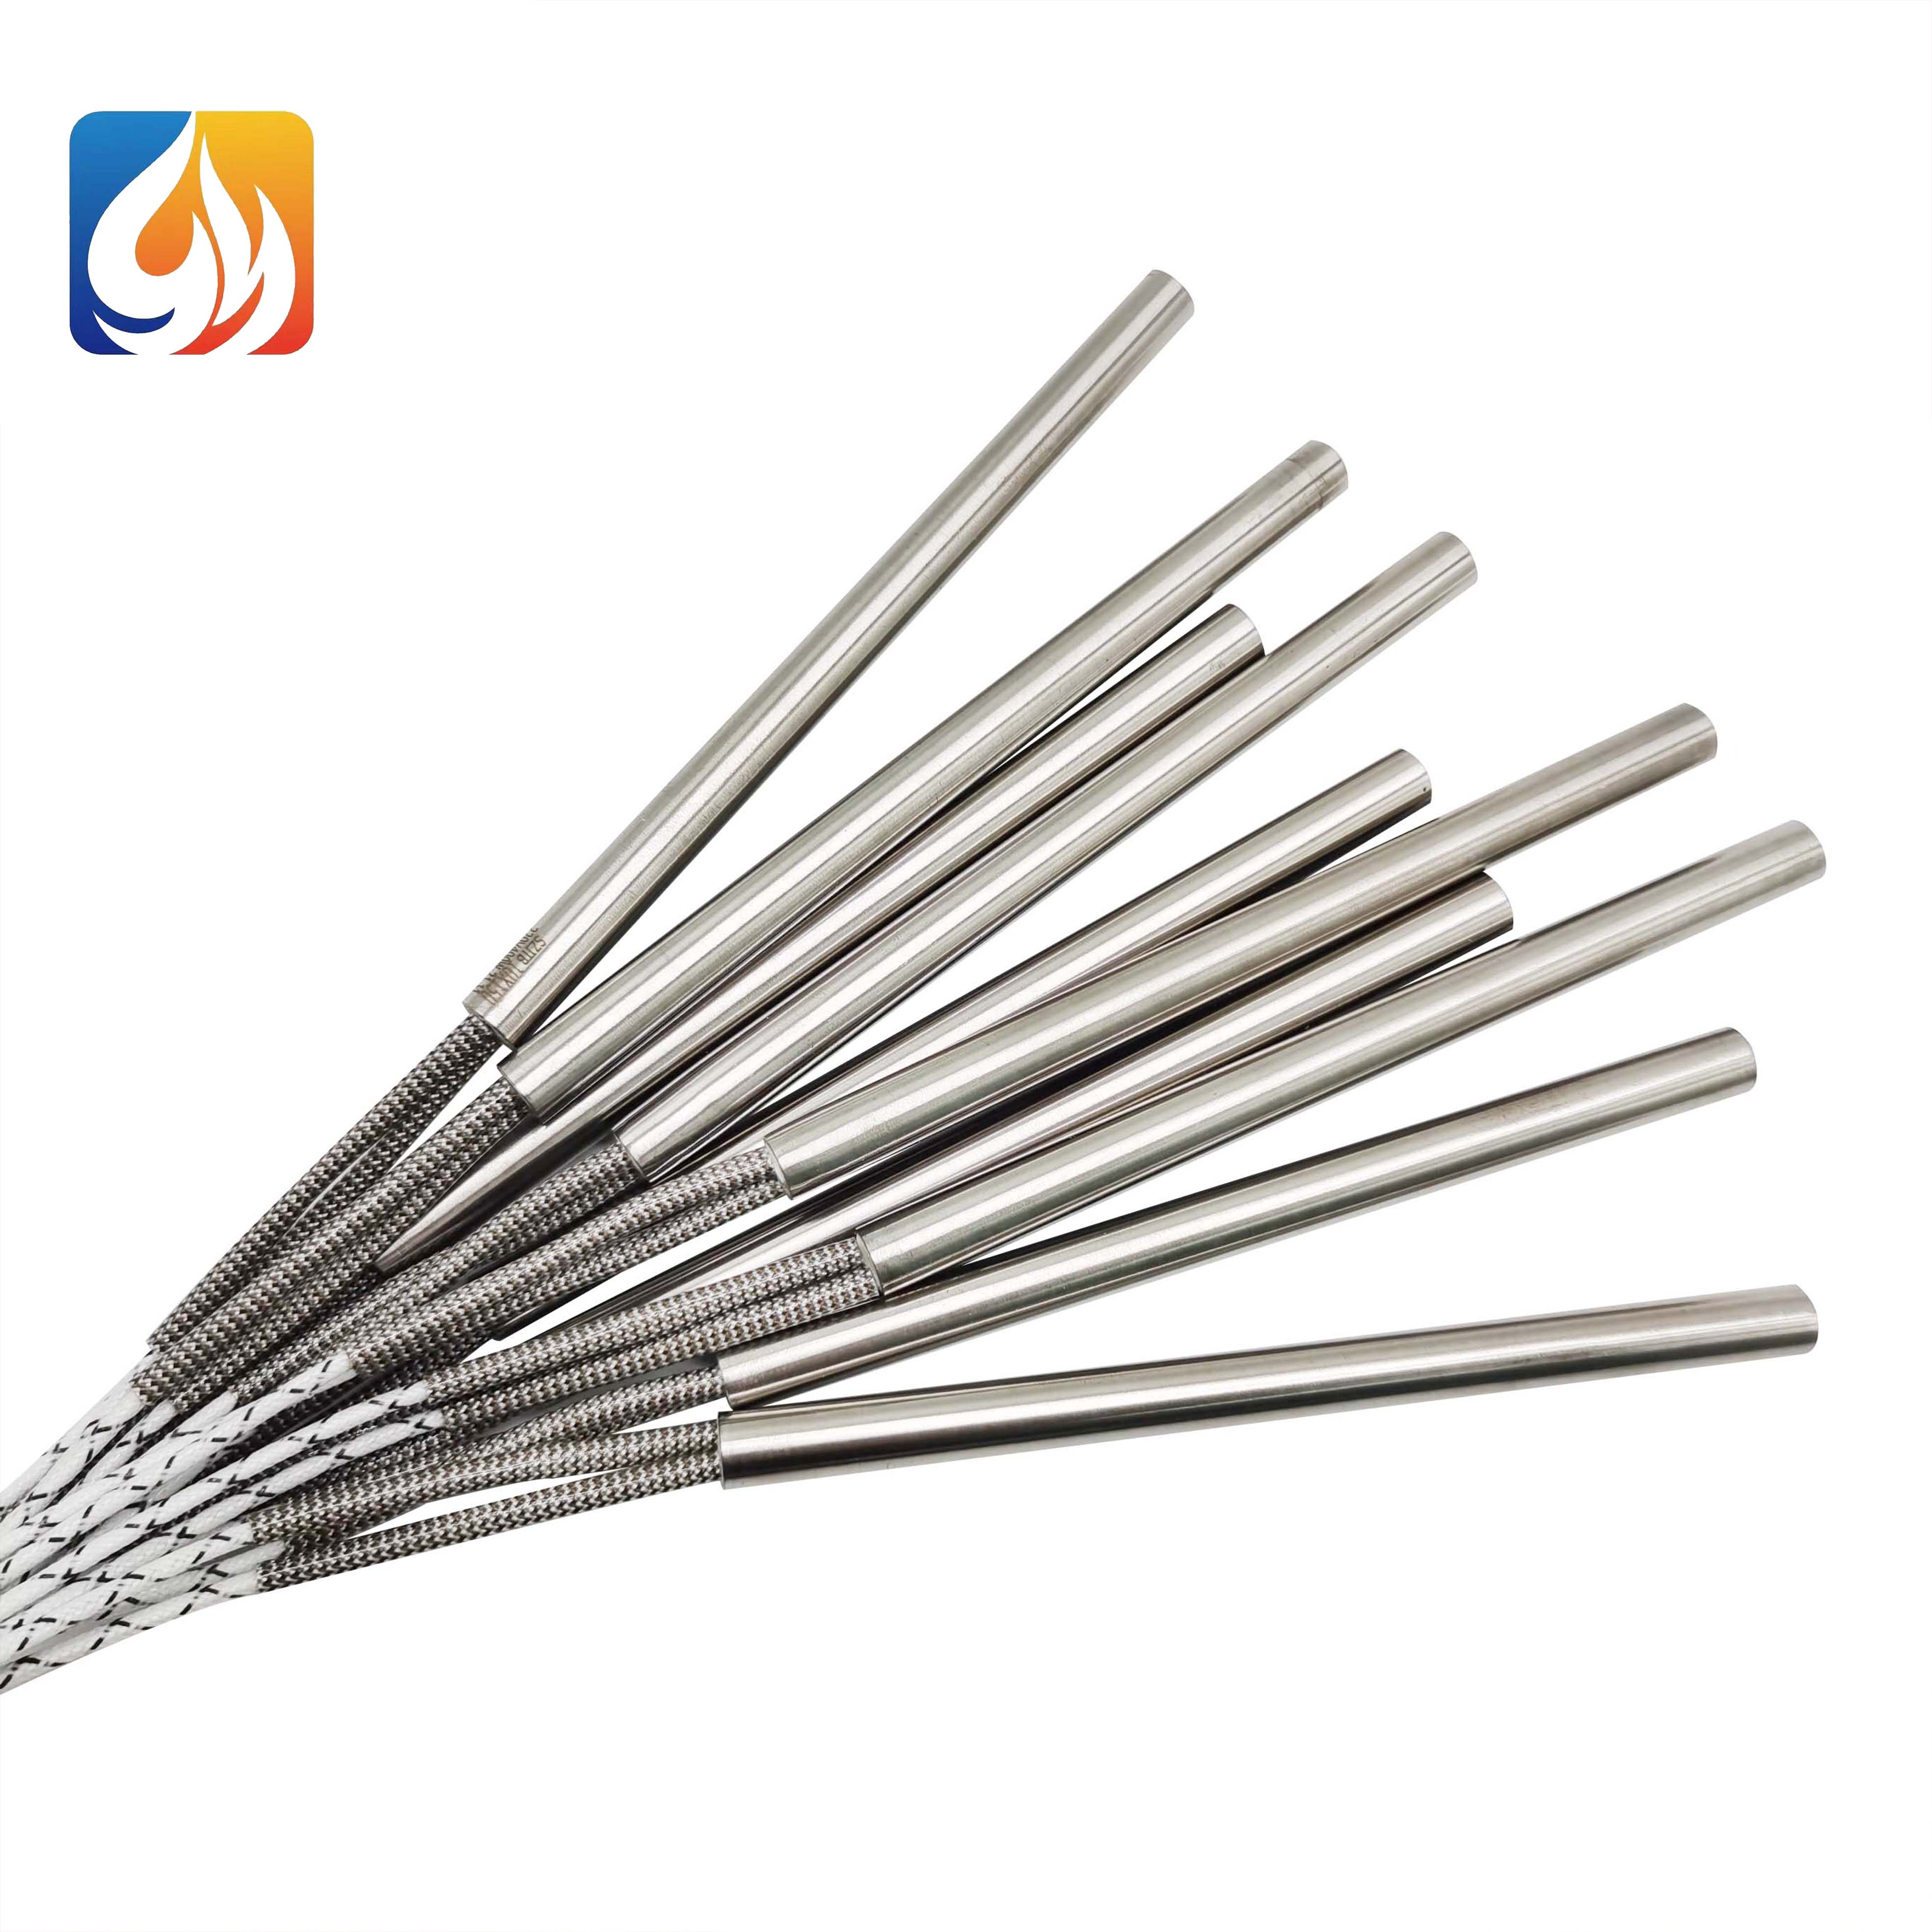 230V 300W stainless steel 310S cartridge heater 3/8″ diameter pellet ignitor Featured Image